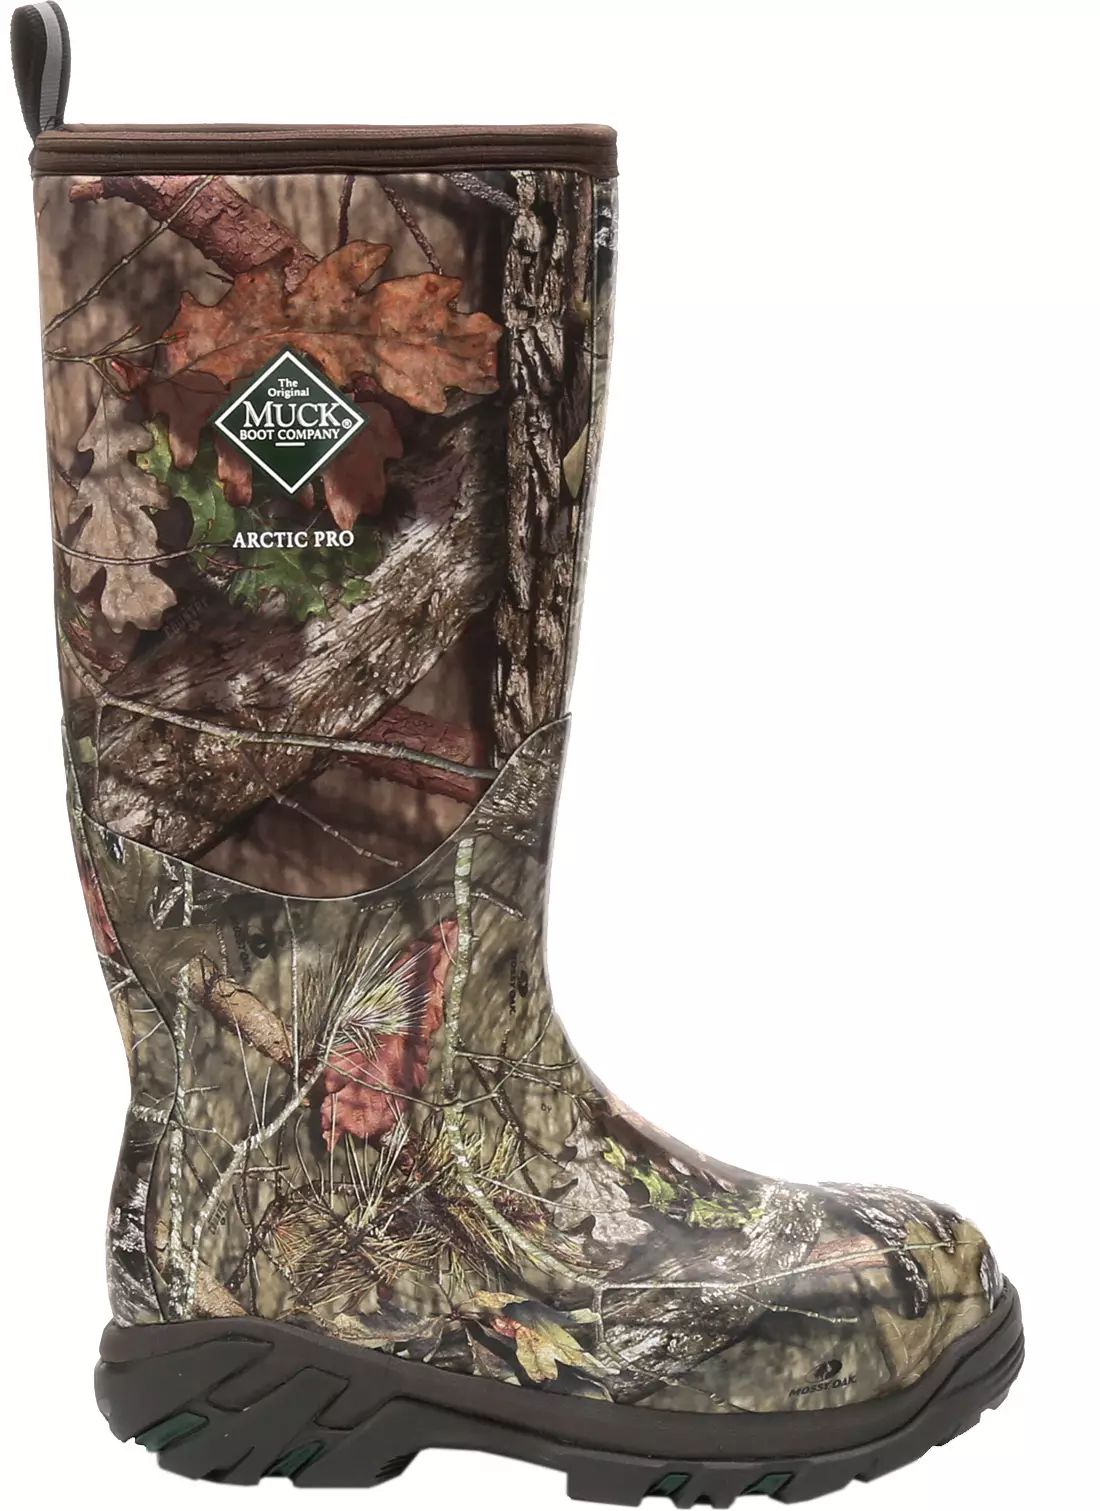 Mens Muck Boots | Dick's Sporting Goods